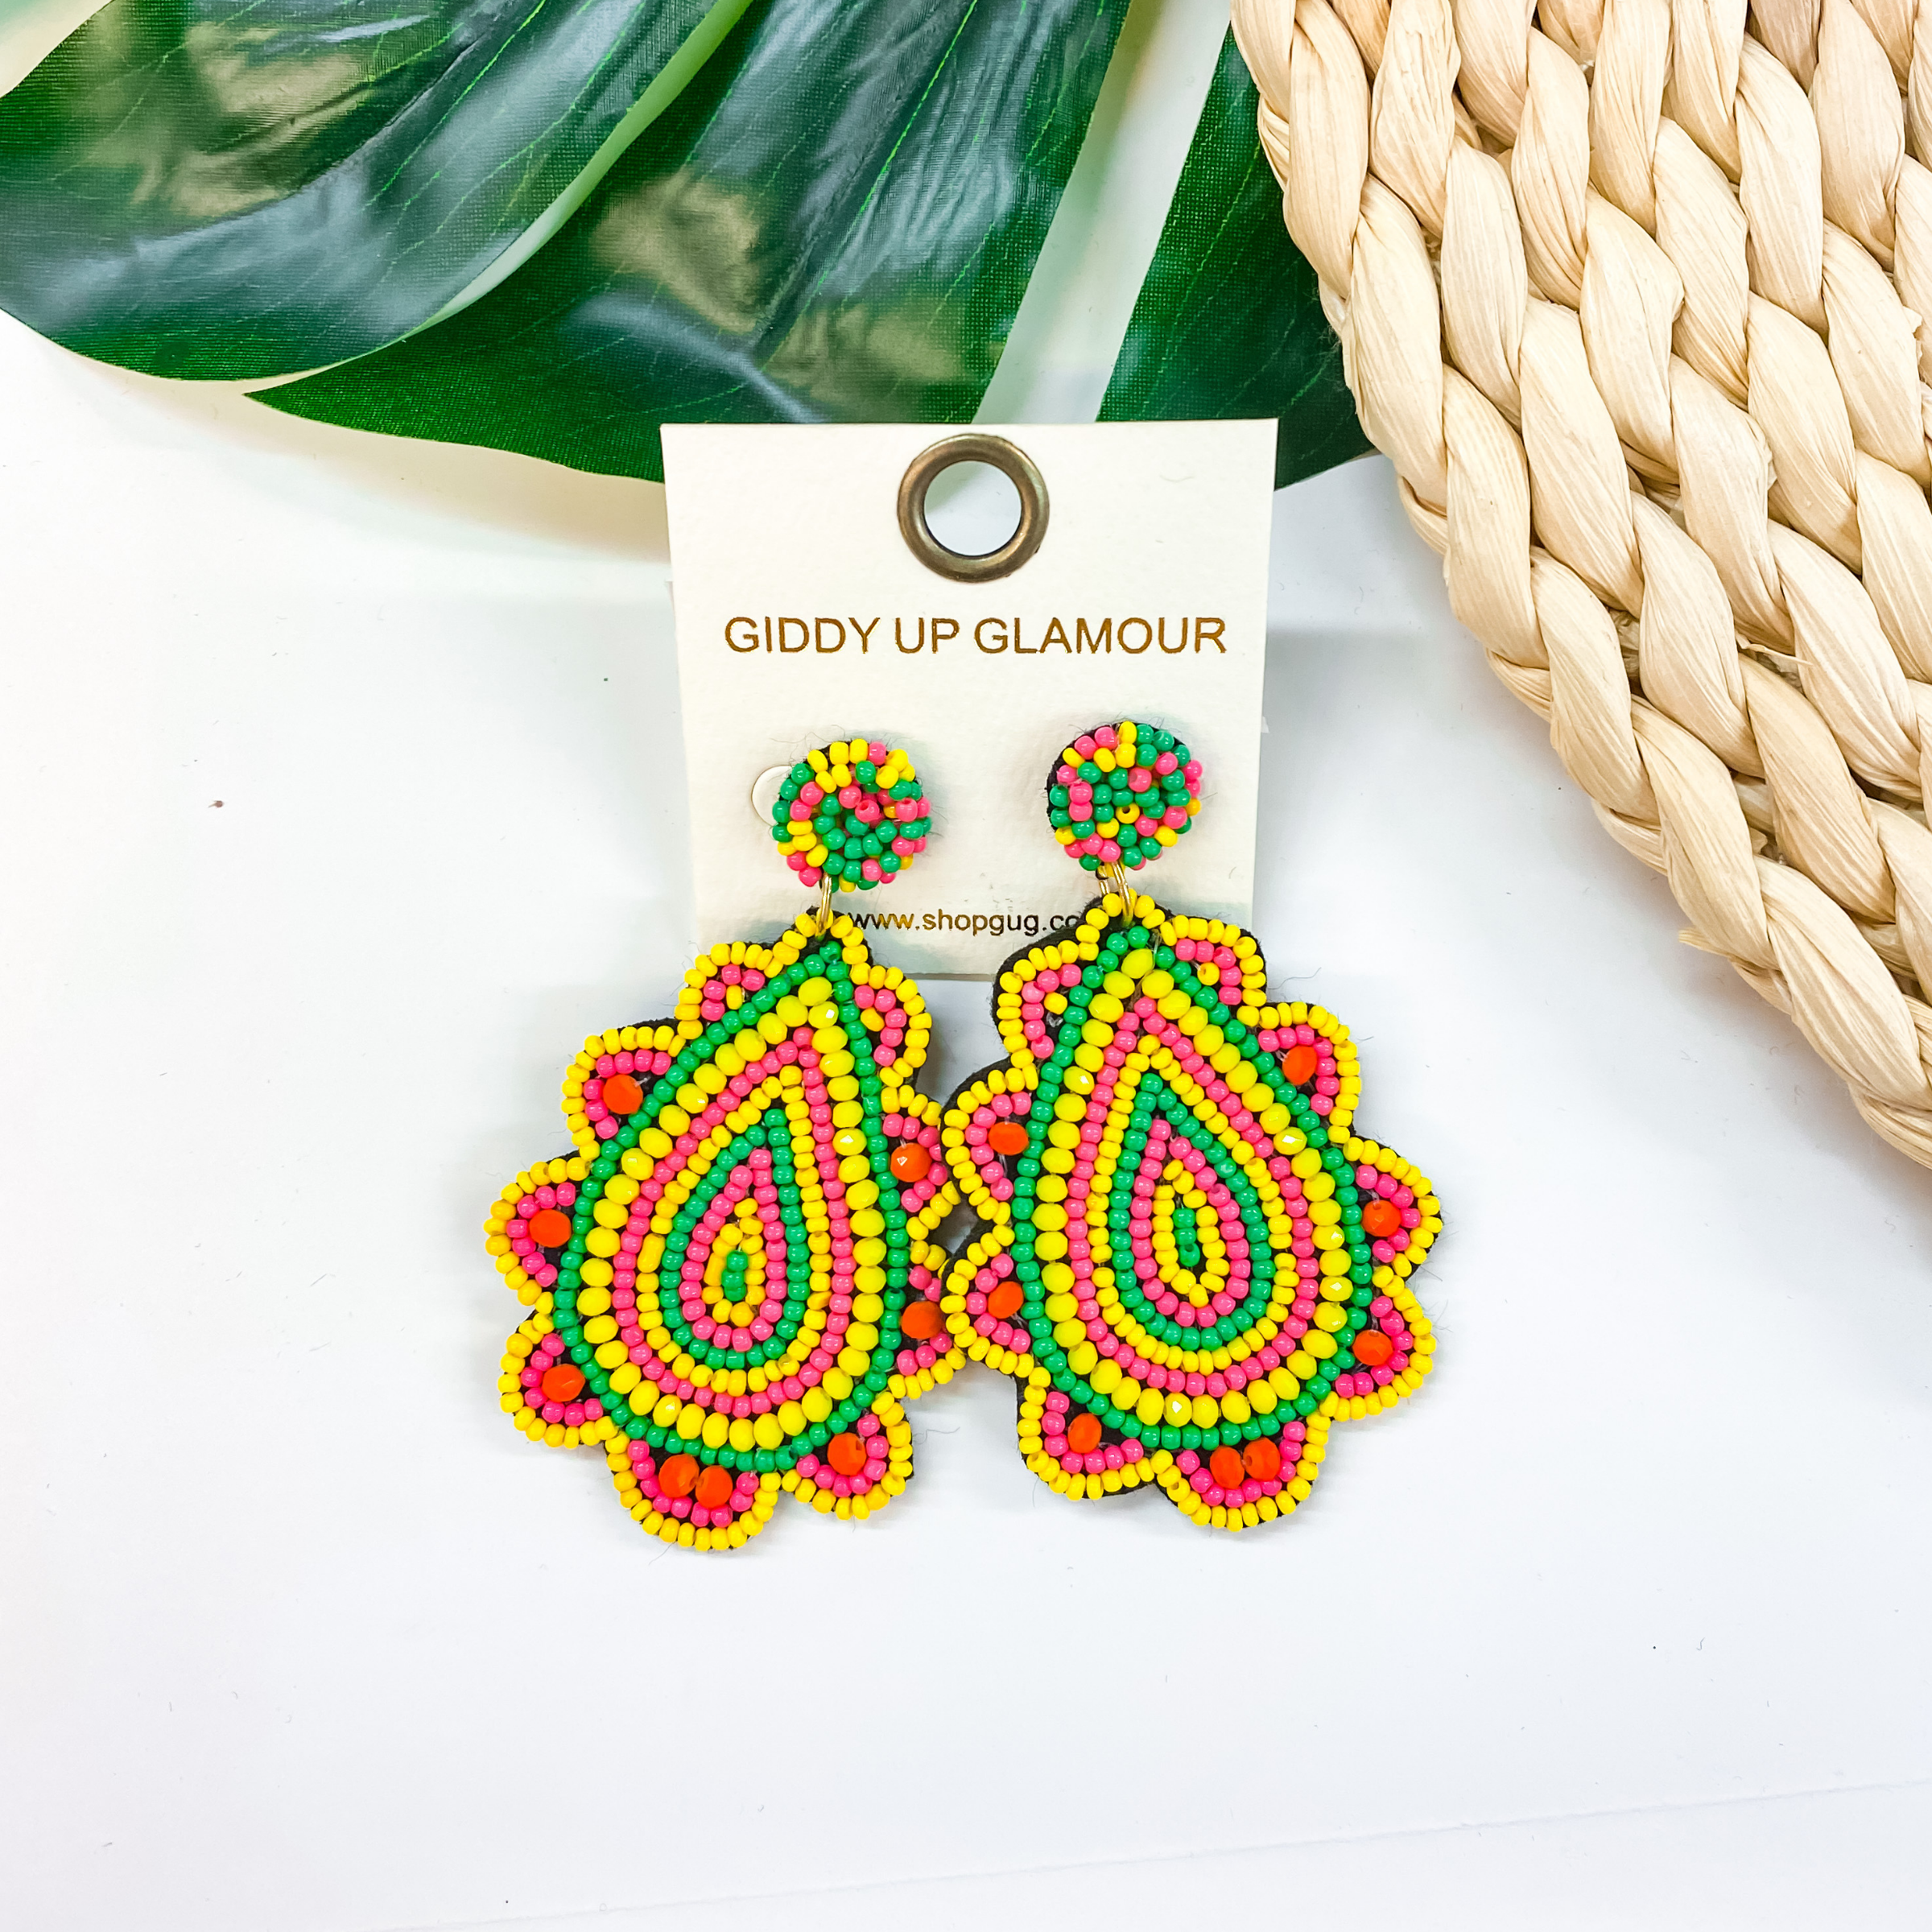 Light Up The Night Seed Bead Teardrop Earrings in Yellow, Pink. and Green - Giddy Up Glamour Boutique